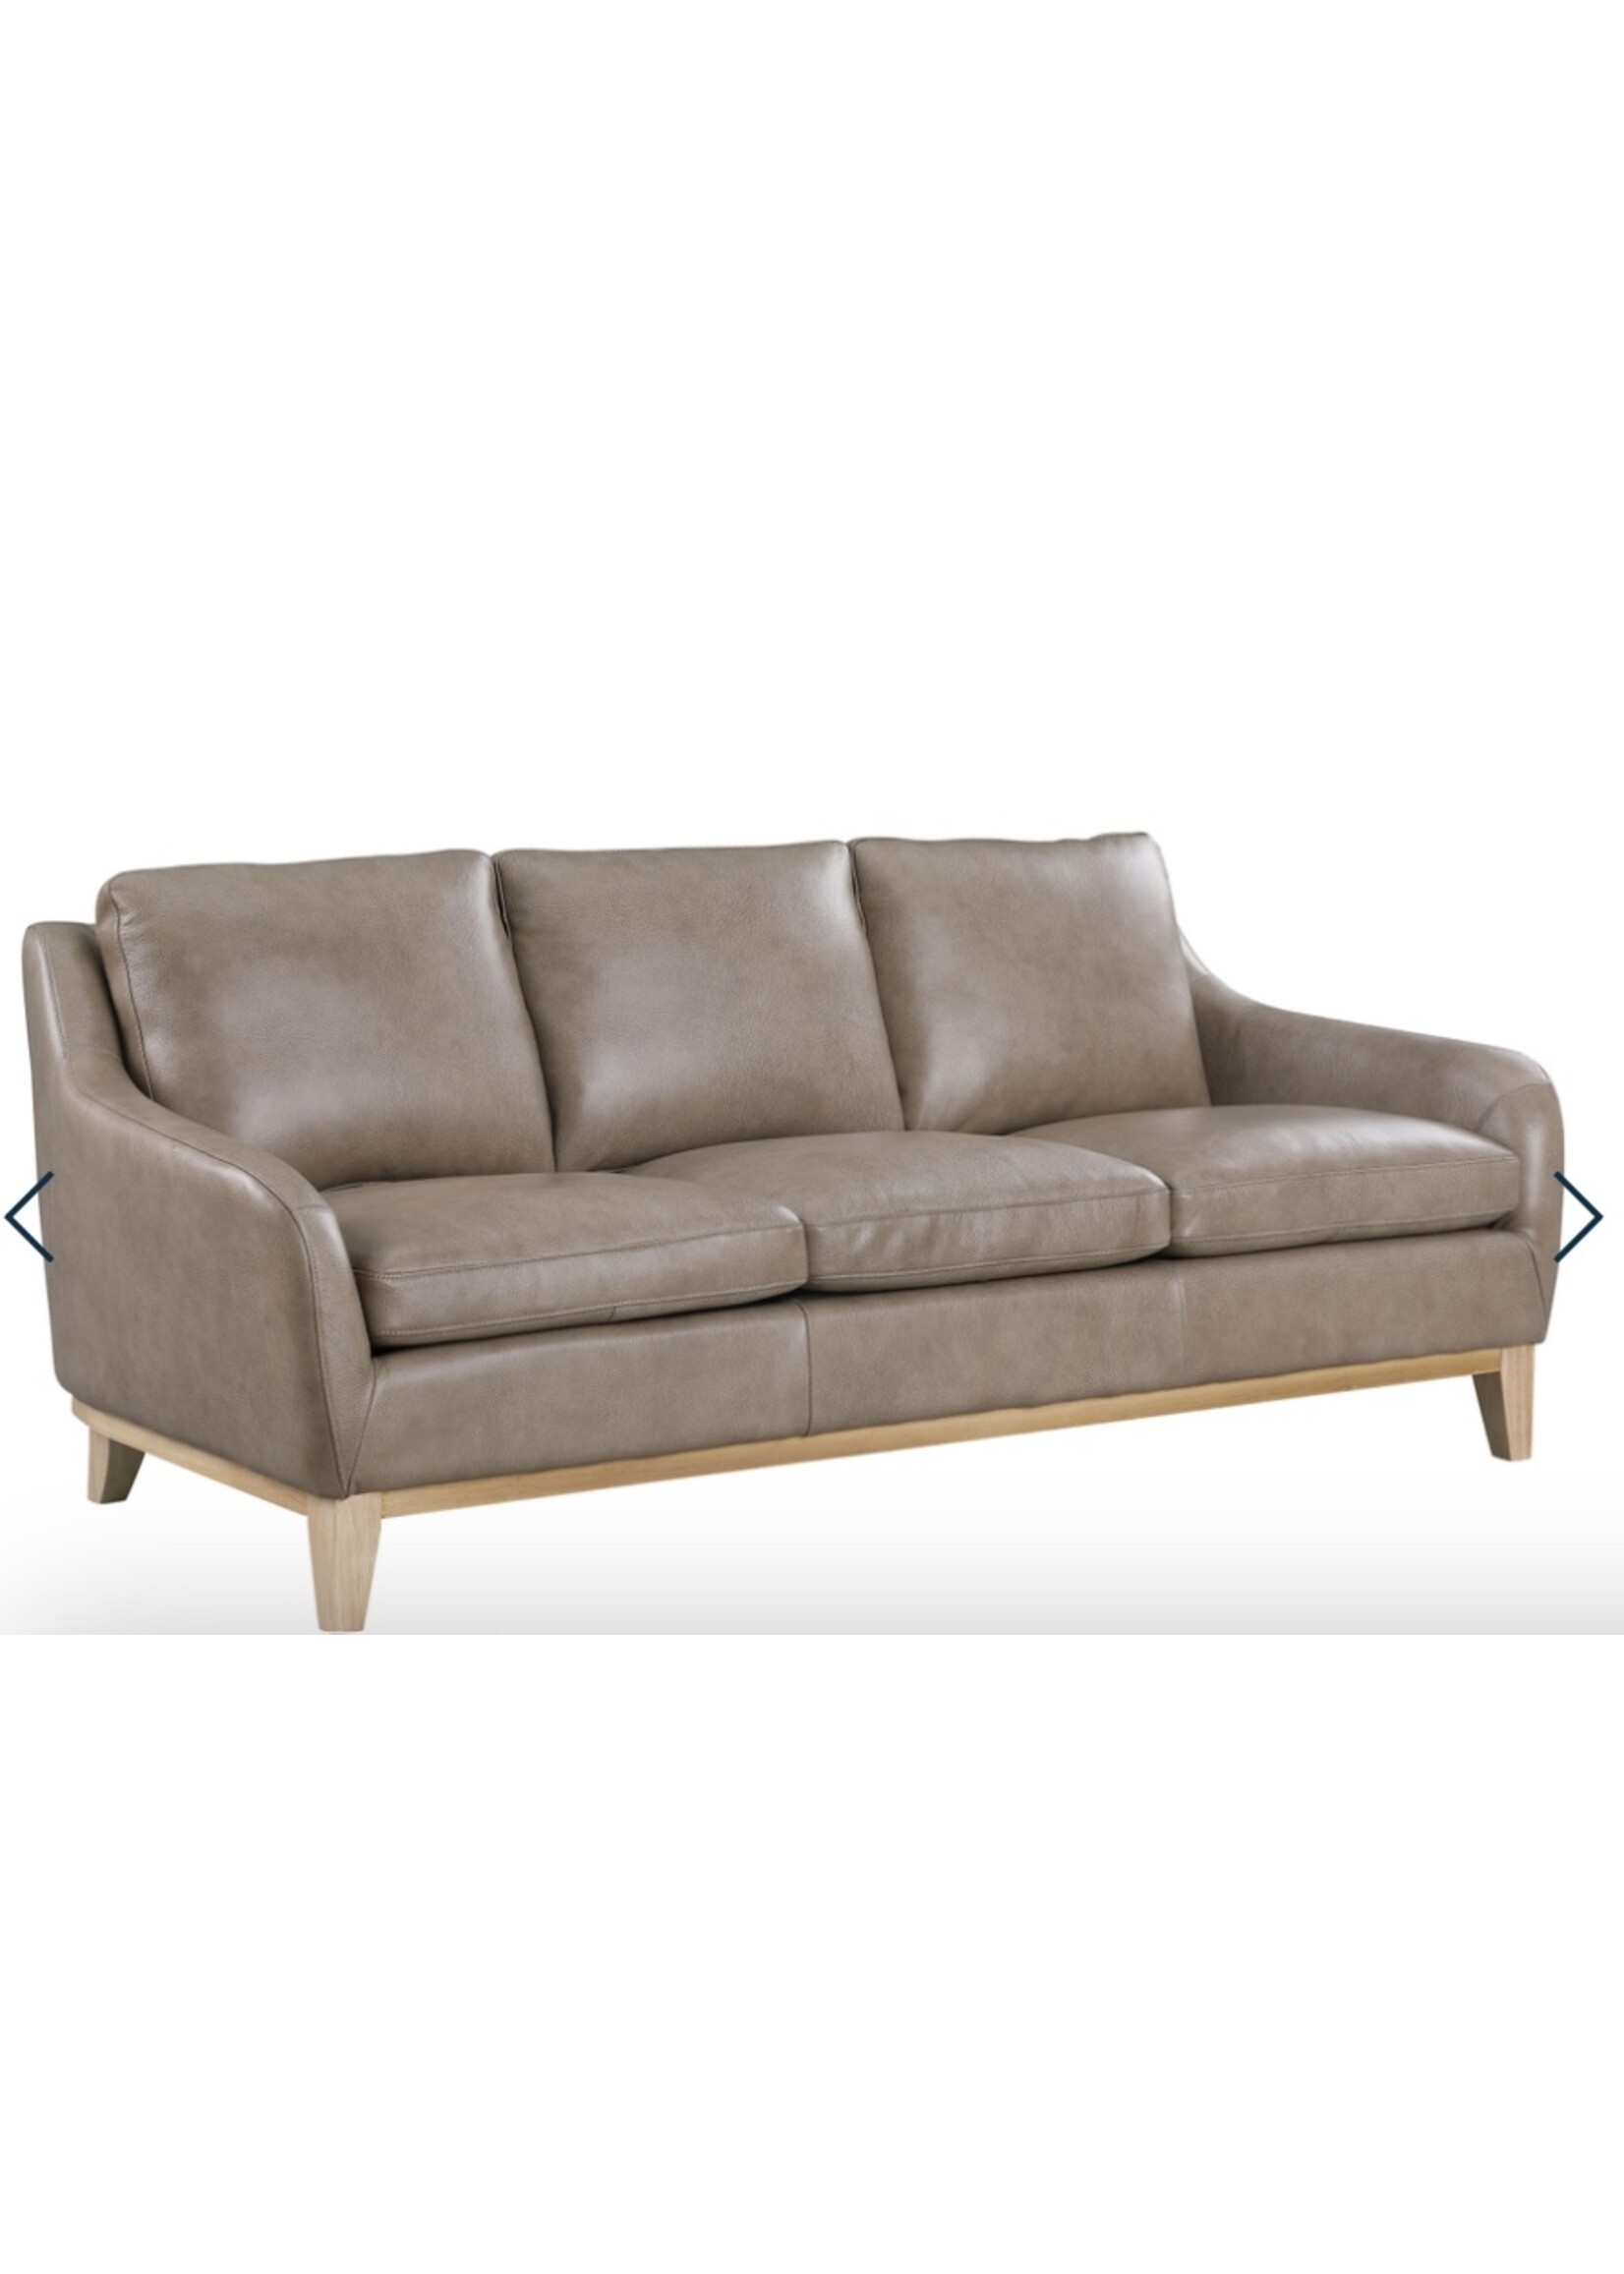 Leather Sofa Sandy Brown W-84" in x D-36 in x H-37 in